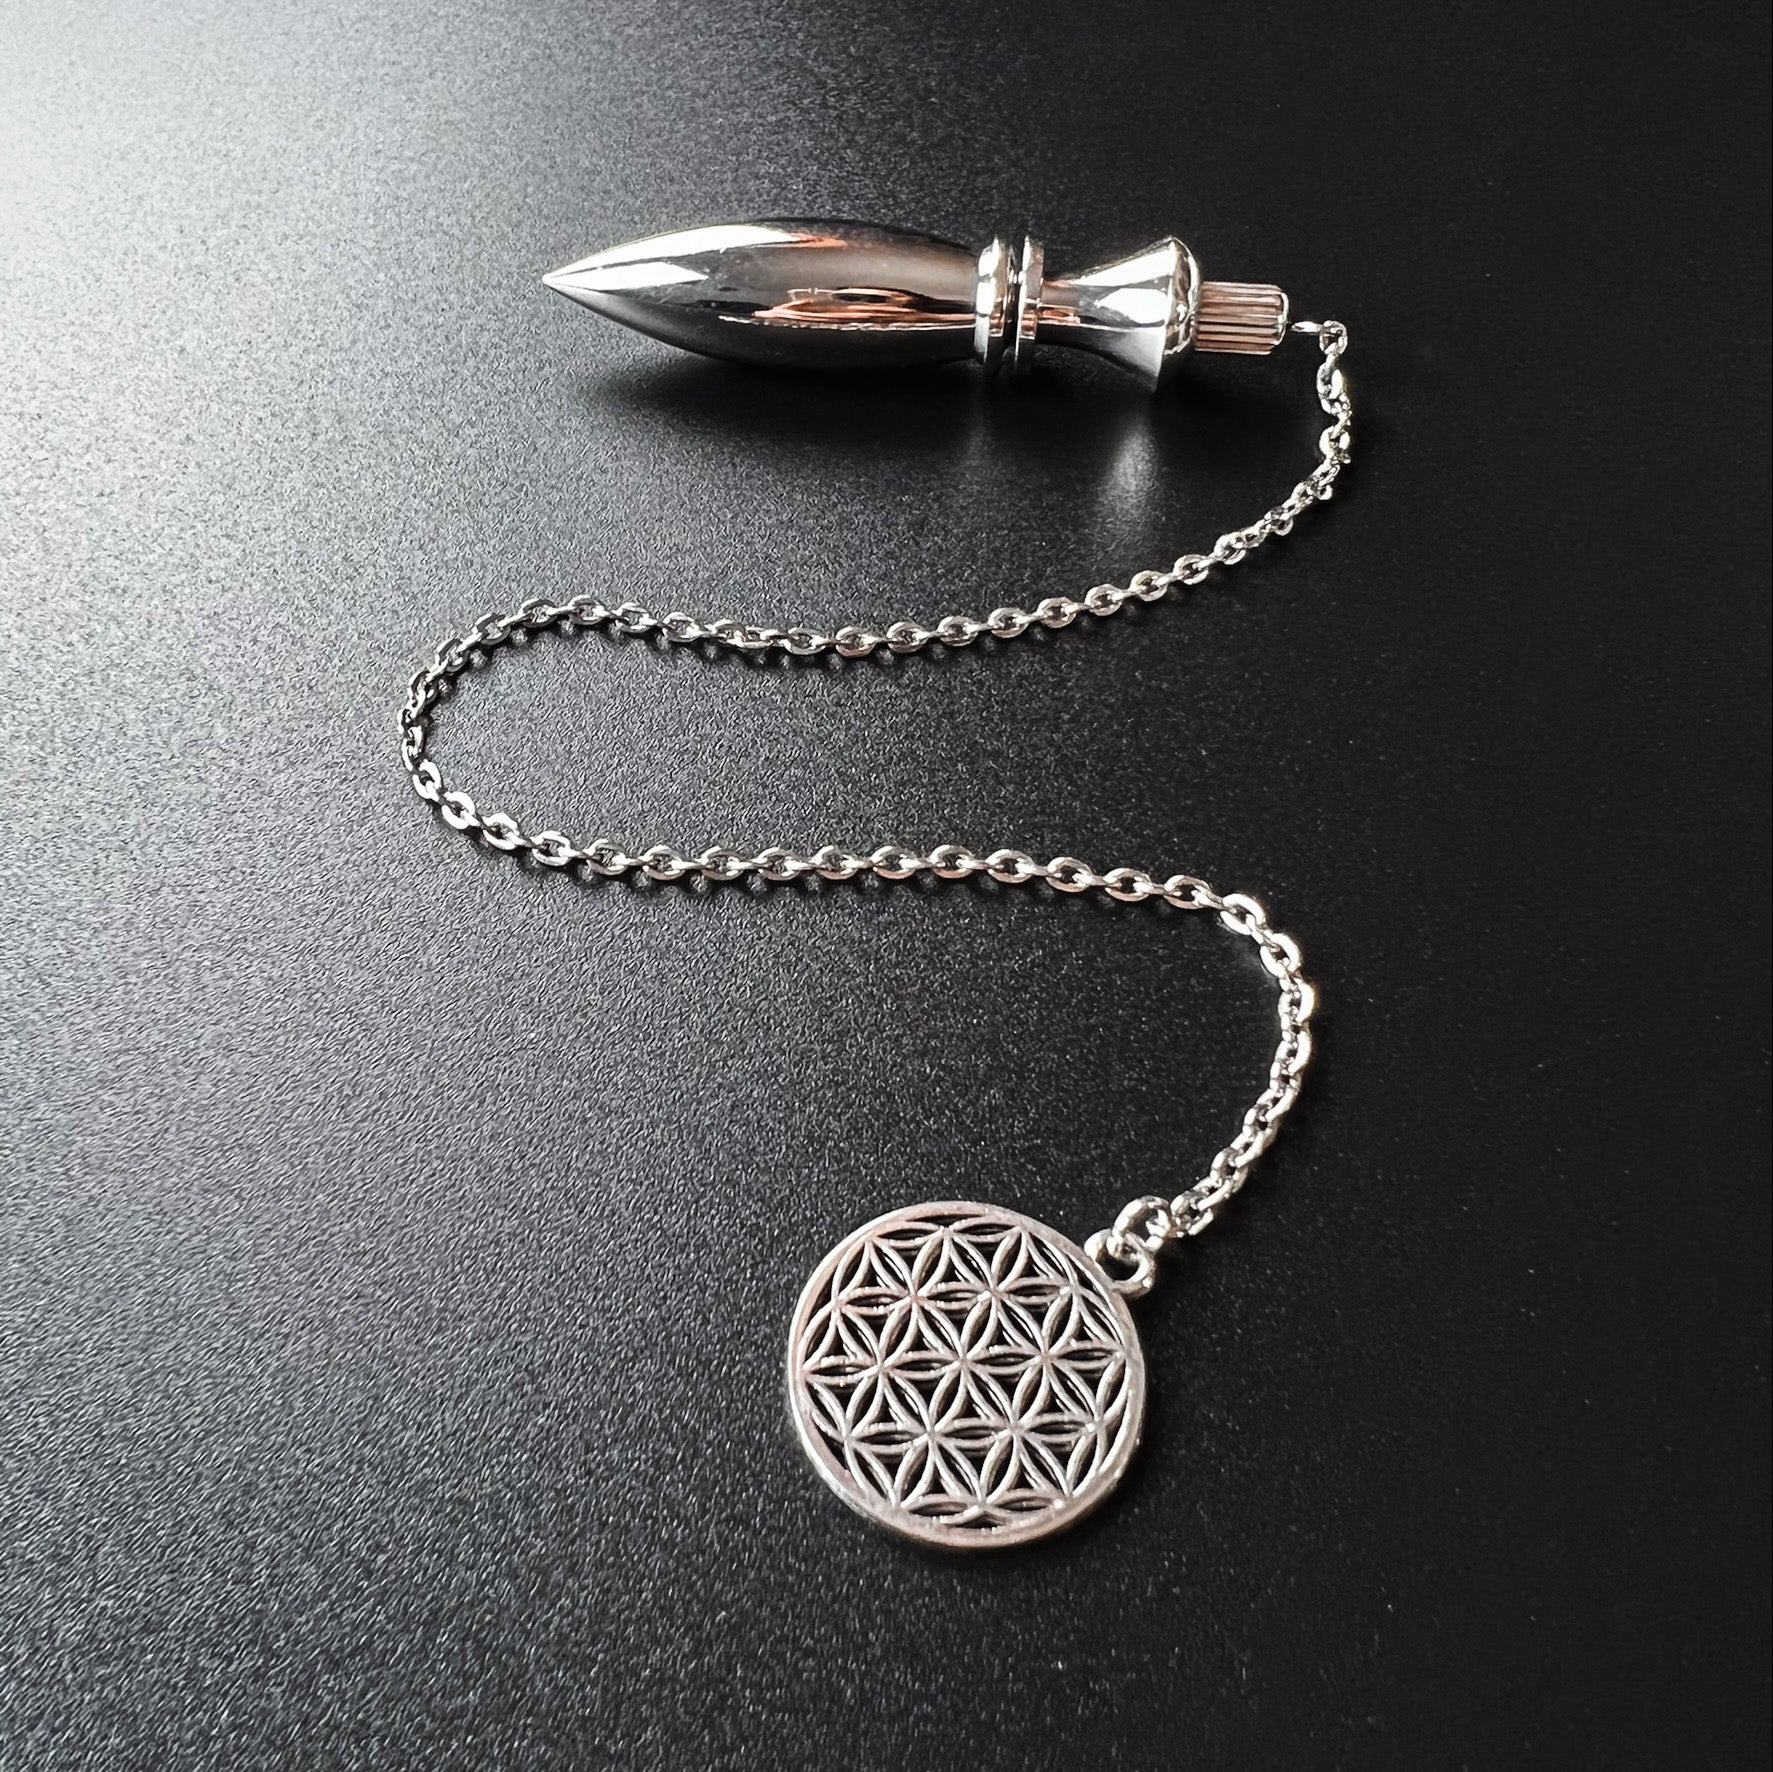 Metal Thot pendulum with a flower of life symbol Baguette Magick